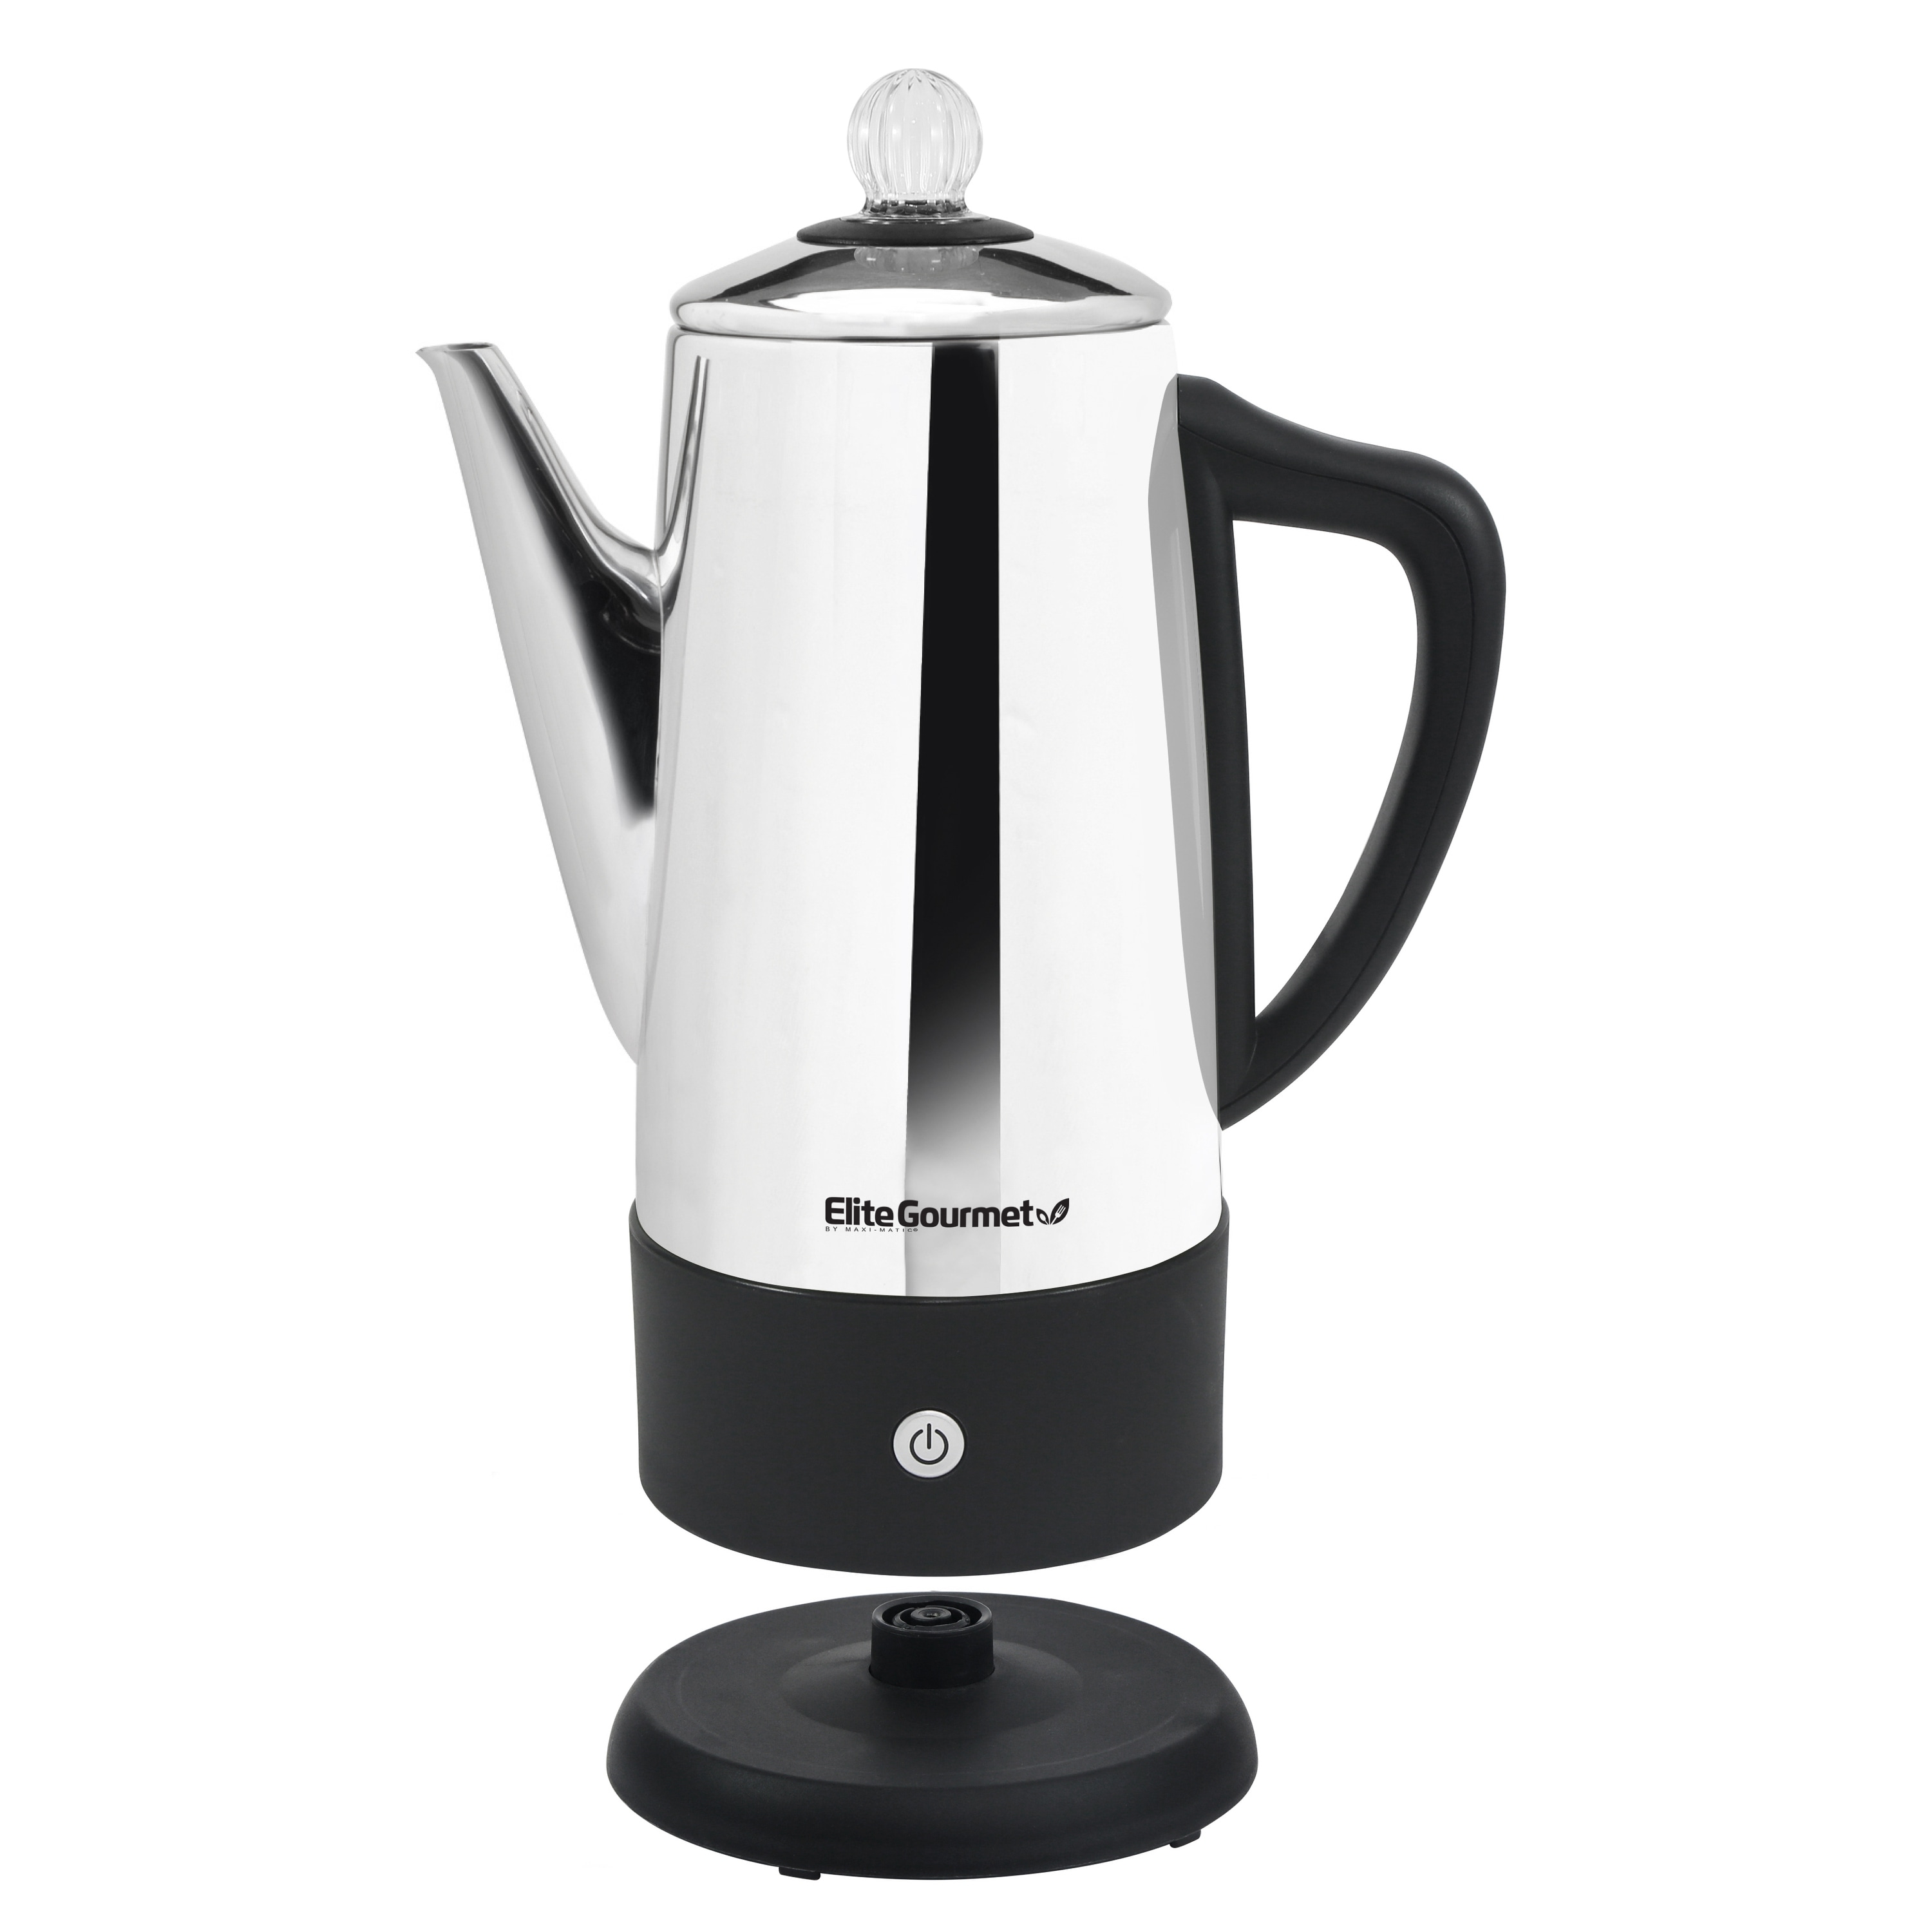 https://ak1.ostkcdn.com/images/products/is/images/direct/827b57fa9b2ec5e45f91da77f0fc195309cc198c/Elite-Gourmet-Stainless-Steel-12-Cup-Percolator-EC-120.jpg